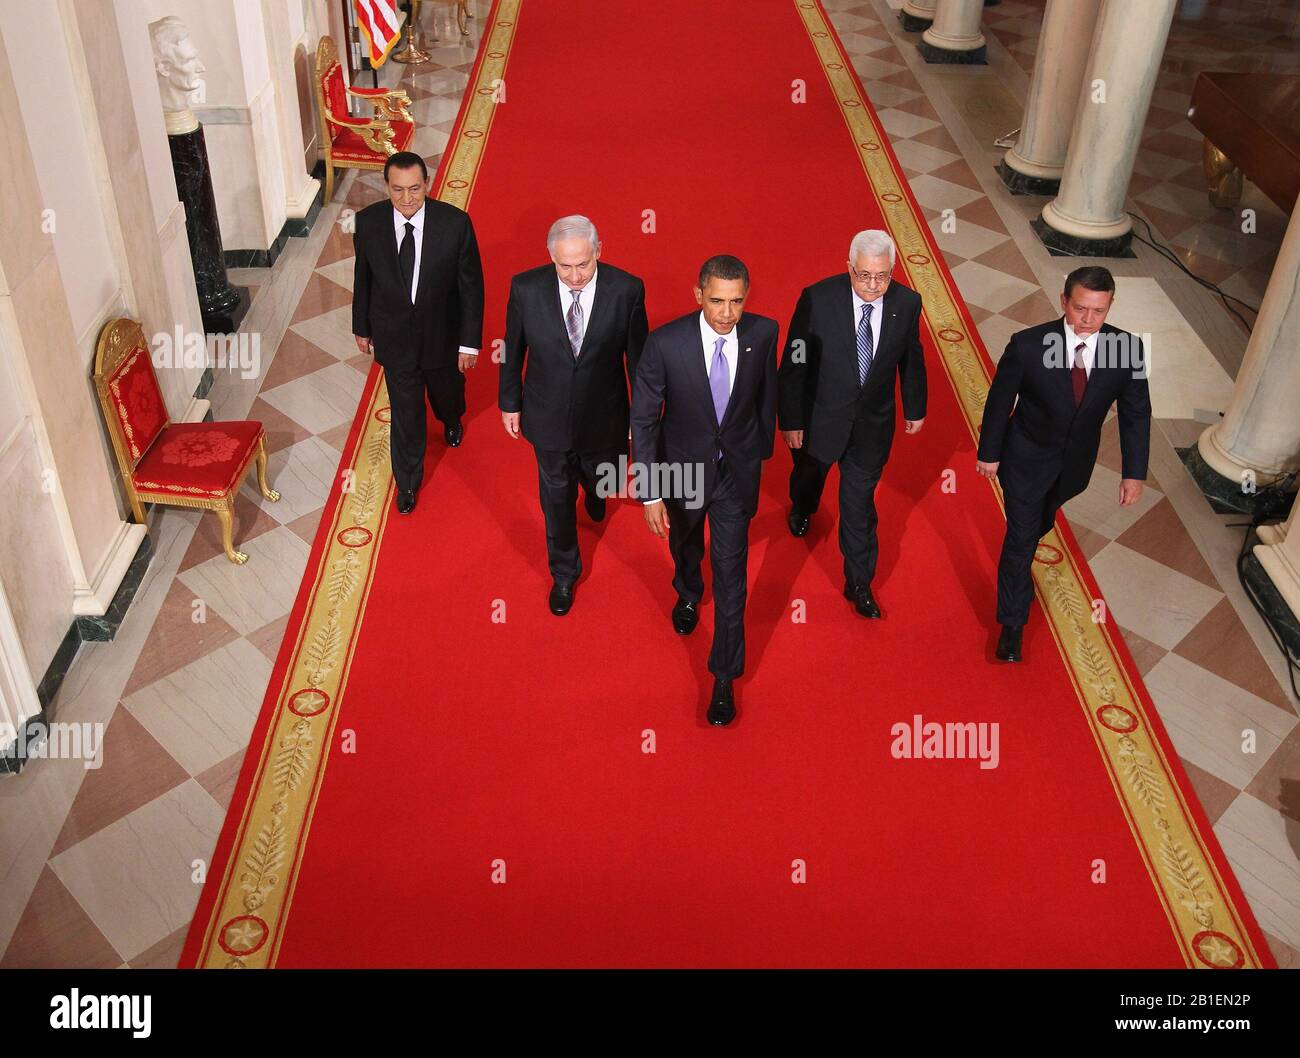 (L-R) Egyptian President Hosni Mubarak, Israeli Prime Minister Benjamin Netanyahu, U.S. President Barack Obama, Palestinian Authority President Mahmoud Abbas, and King Abdullah II of Jordan walk toward the East Room of the White House for statements on the first day of the Middle East peace talks September 1, 2010 in Washington, DC. The White House has kicked off a new round of direct peace talks for the Middle East, the first one in more than 18 months.  .Credit: Alex Wong - Pool via CNP | usage worldwide Stock Photo